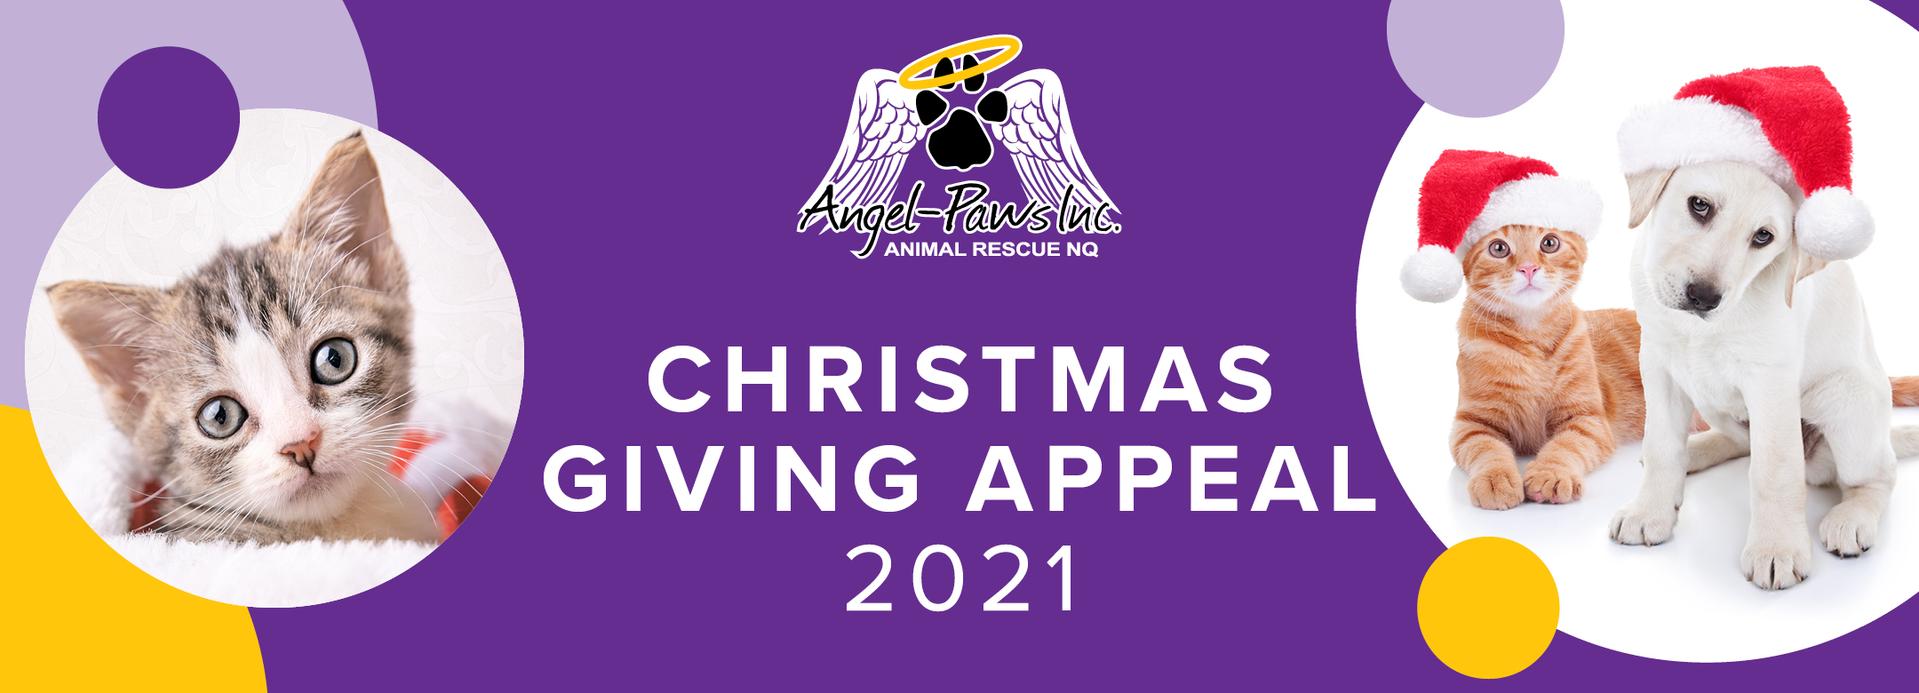 Angel-Paws Christmas Giving Appeal 2021